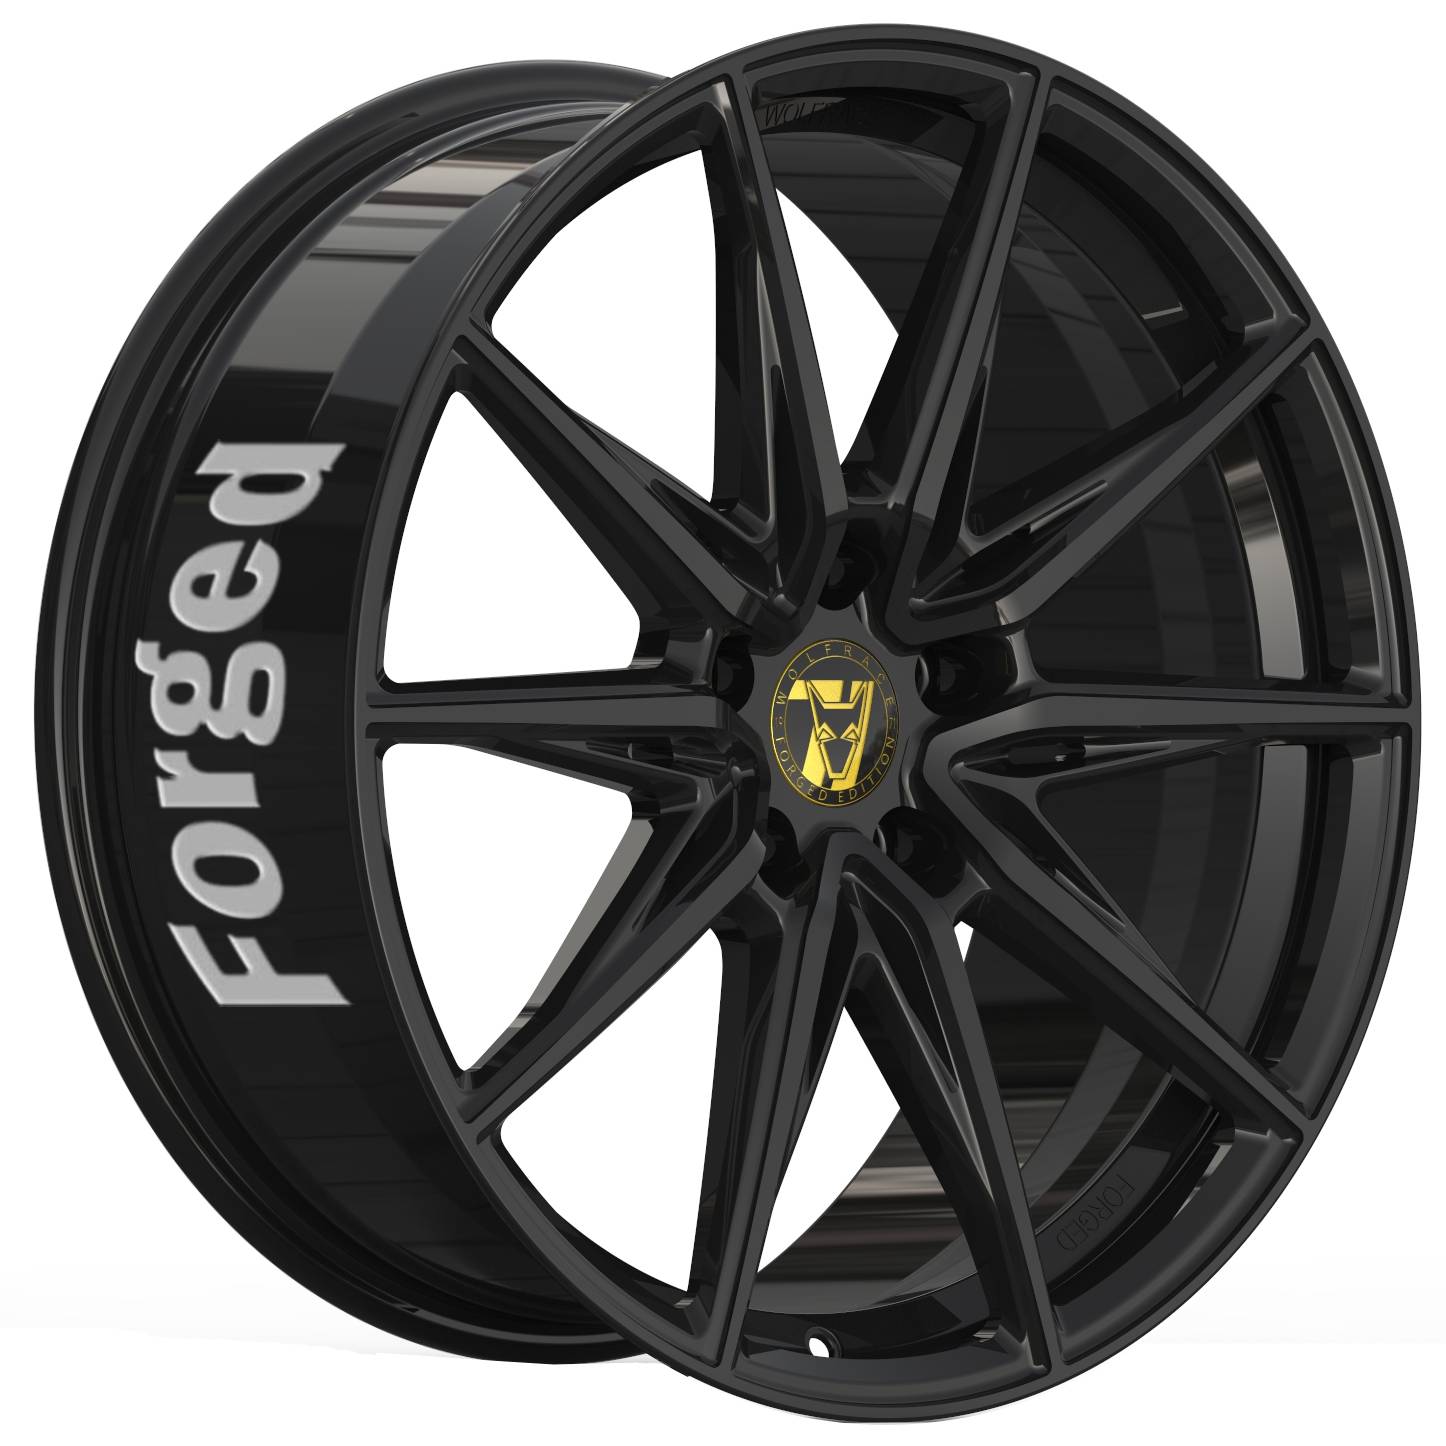 Jantes alu Demon Wheels 71 Forged Edition Urban Racer Forged [8x19] -5x112- ET 20